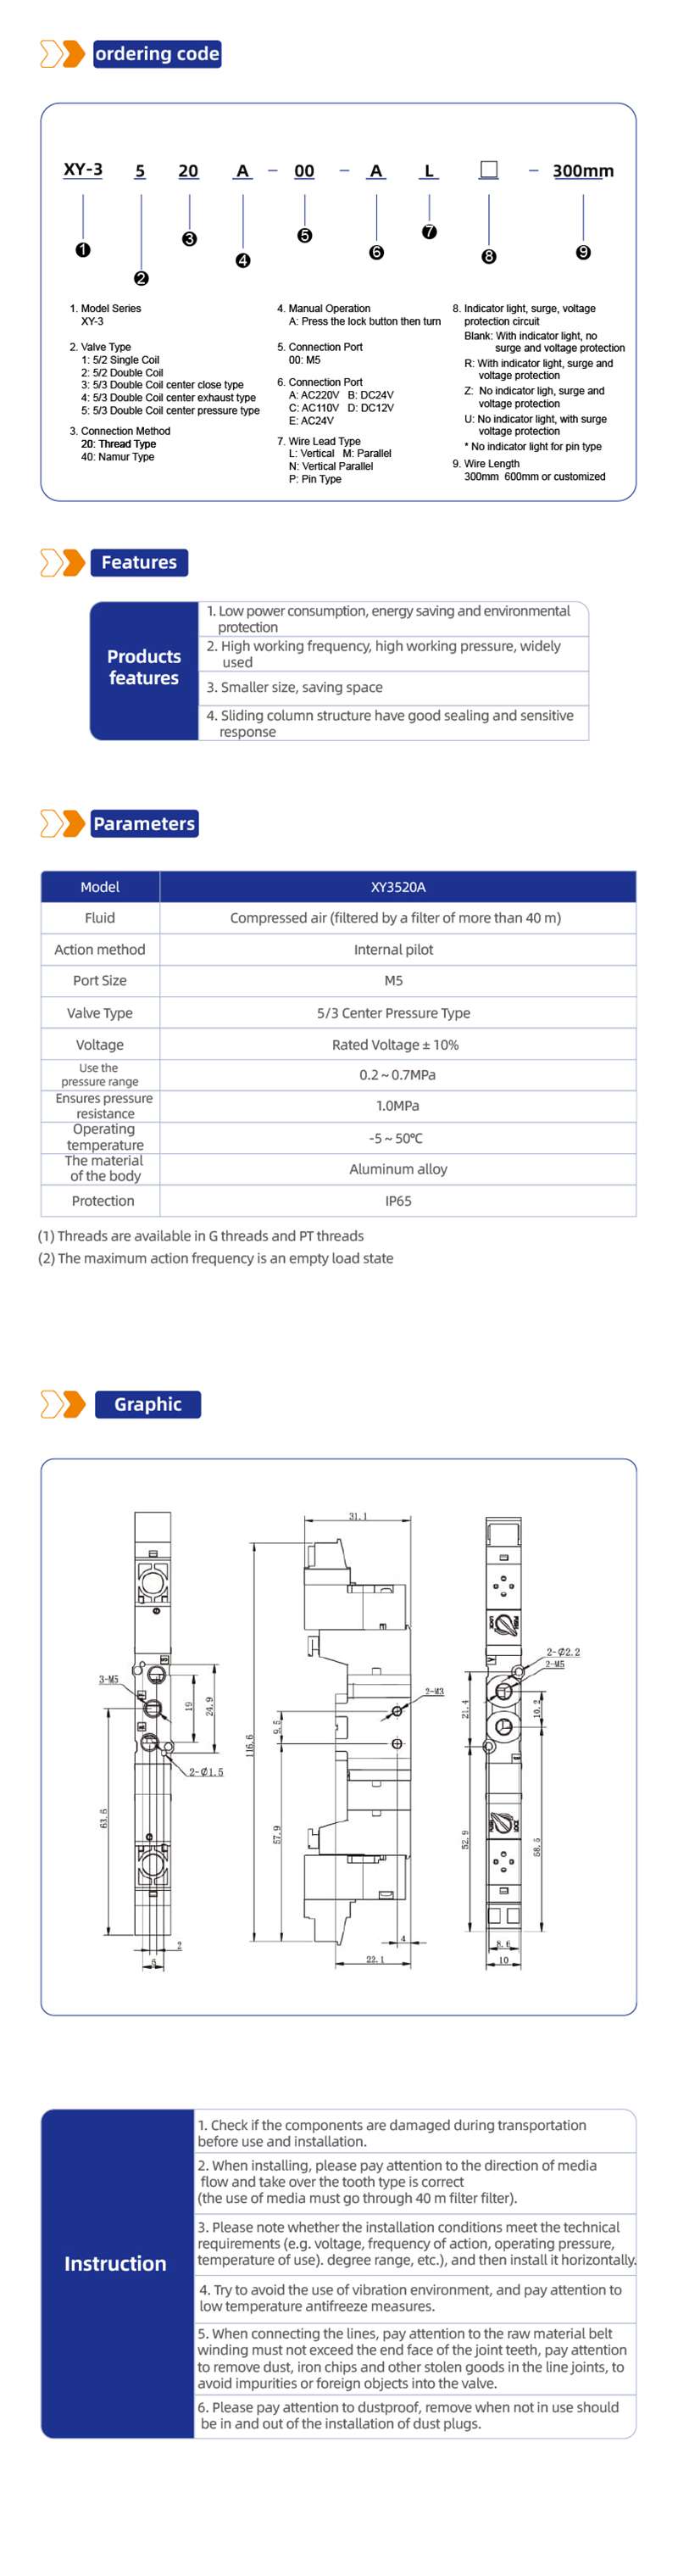 XY3520A Directional Control Valve